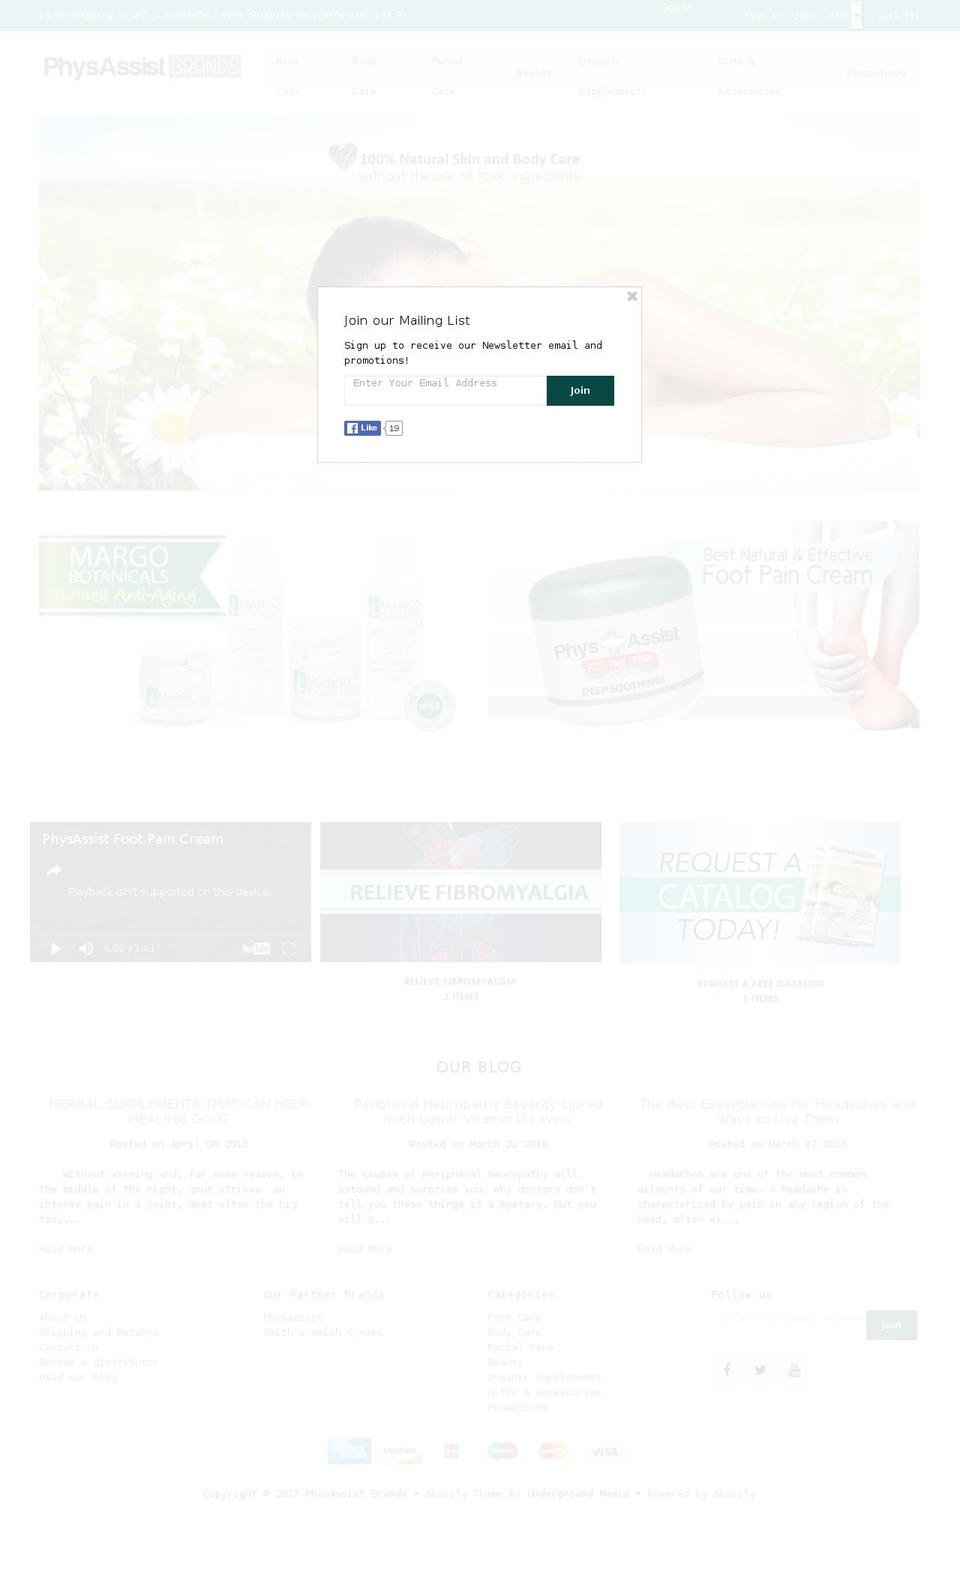 Mr Parker Shopify theme site example physassistbrands.com